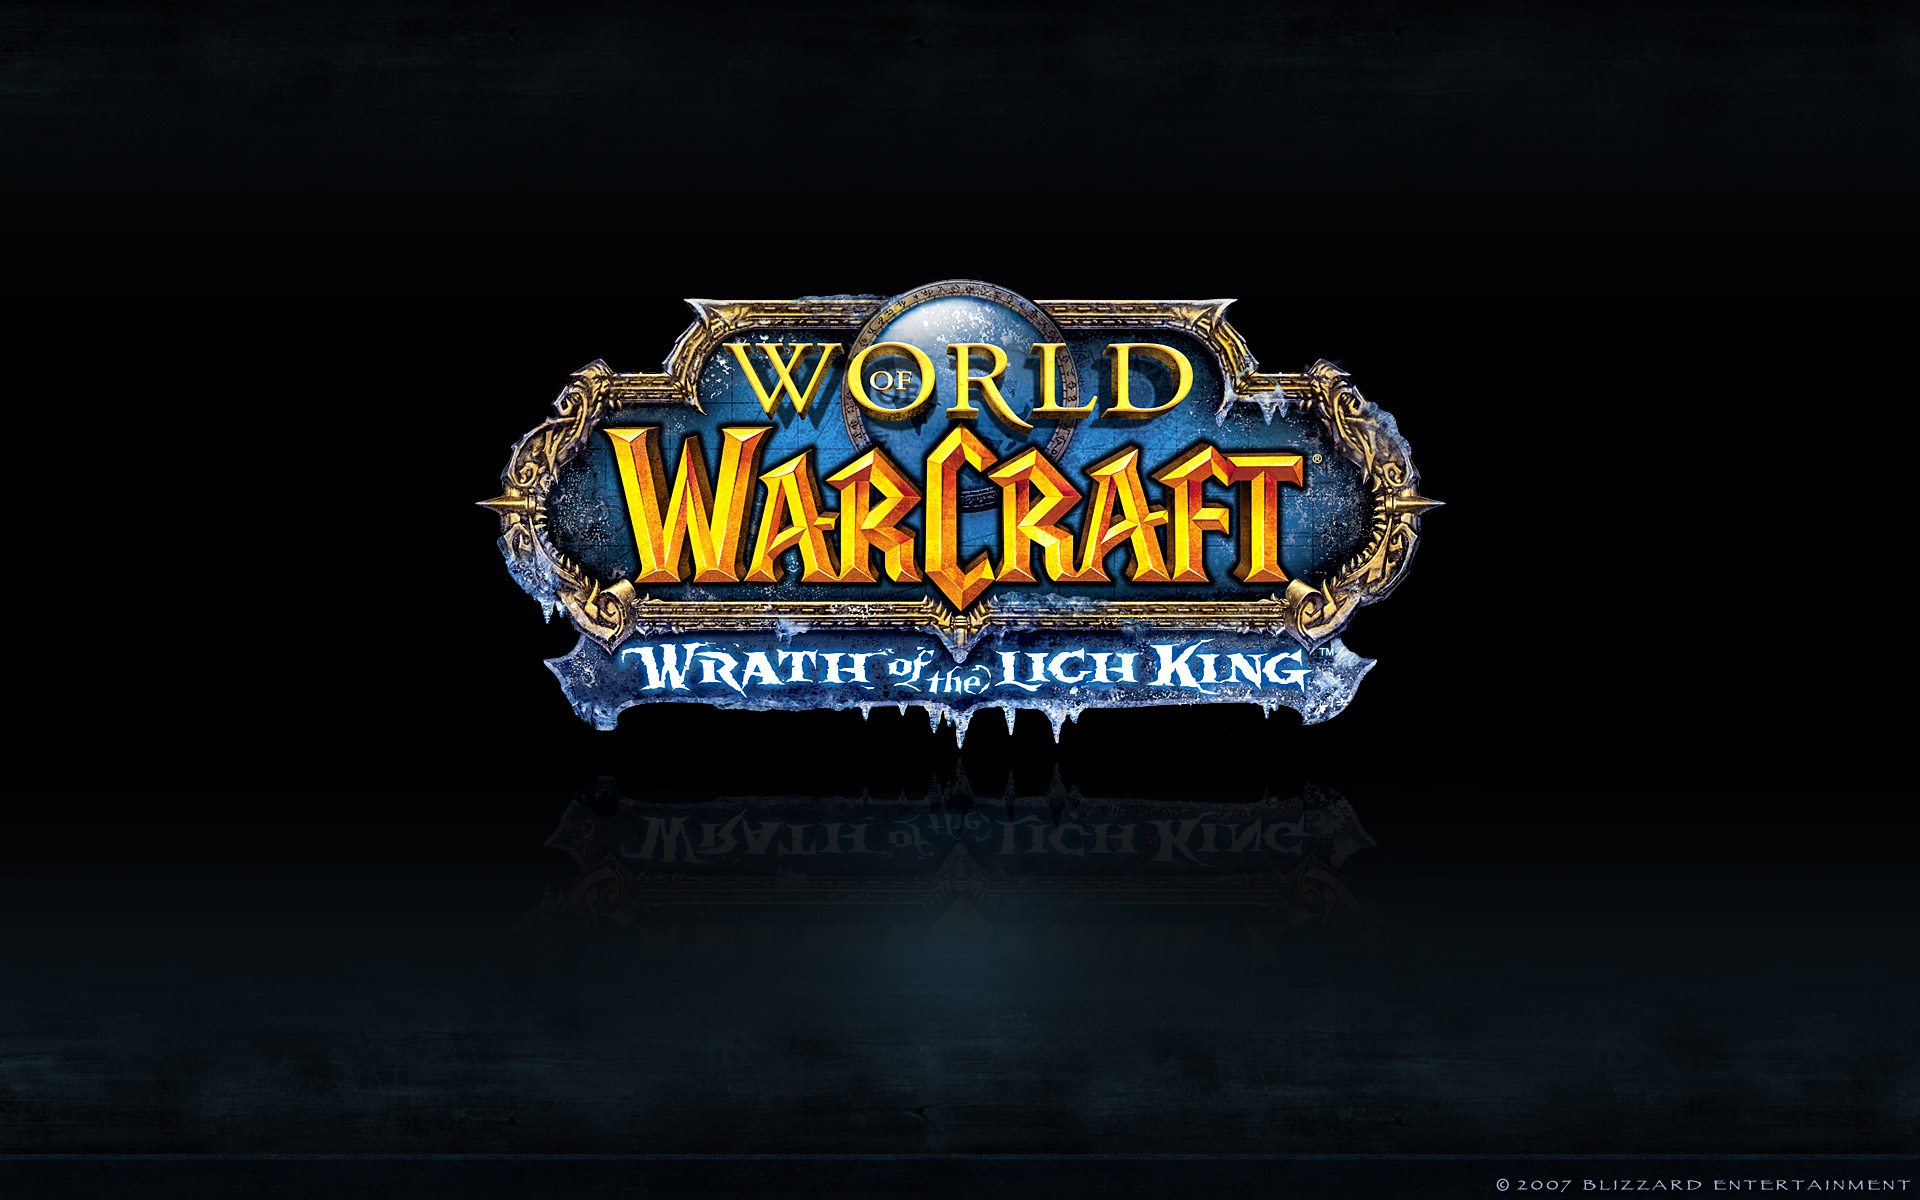 World of Warcraft Wrath of the Lich King Wallpaper Full HD ID1012